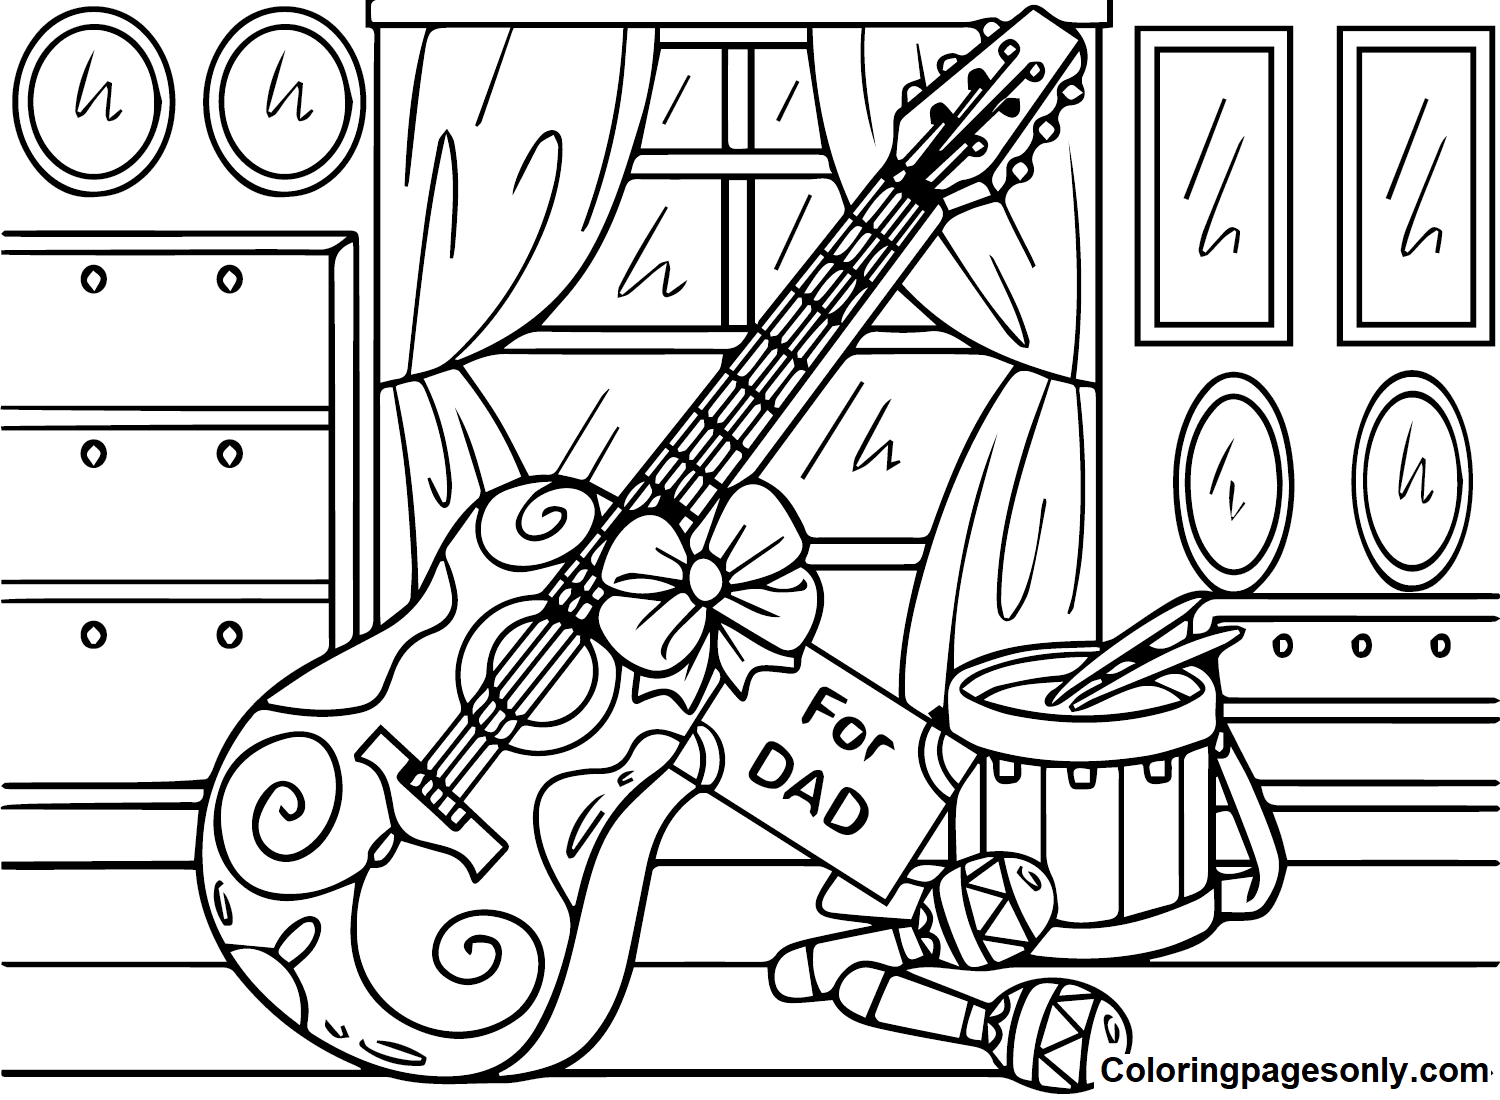 Guitar to print Coloring Pages